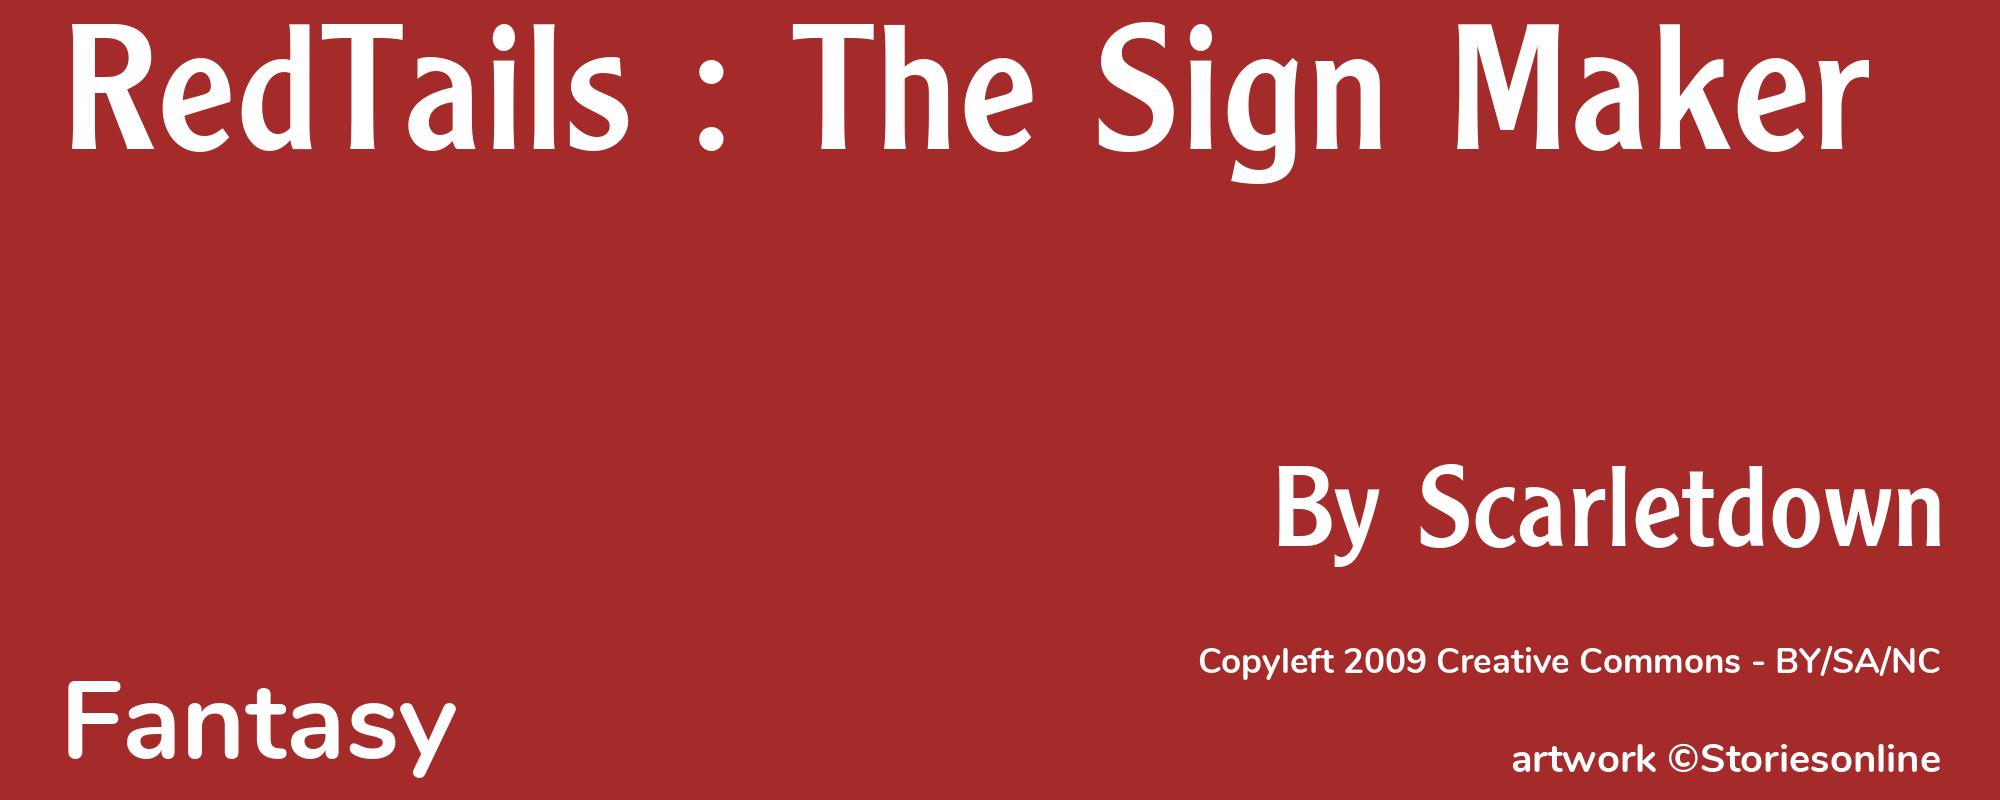 RedTails : The Sign Maker - Cover